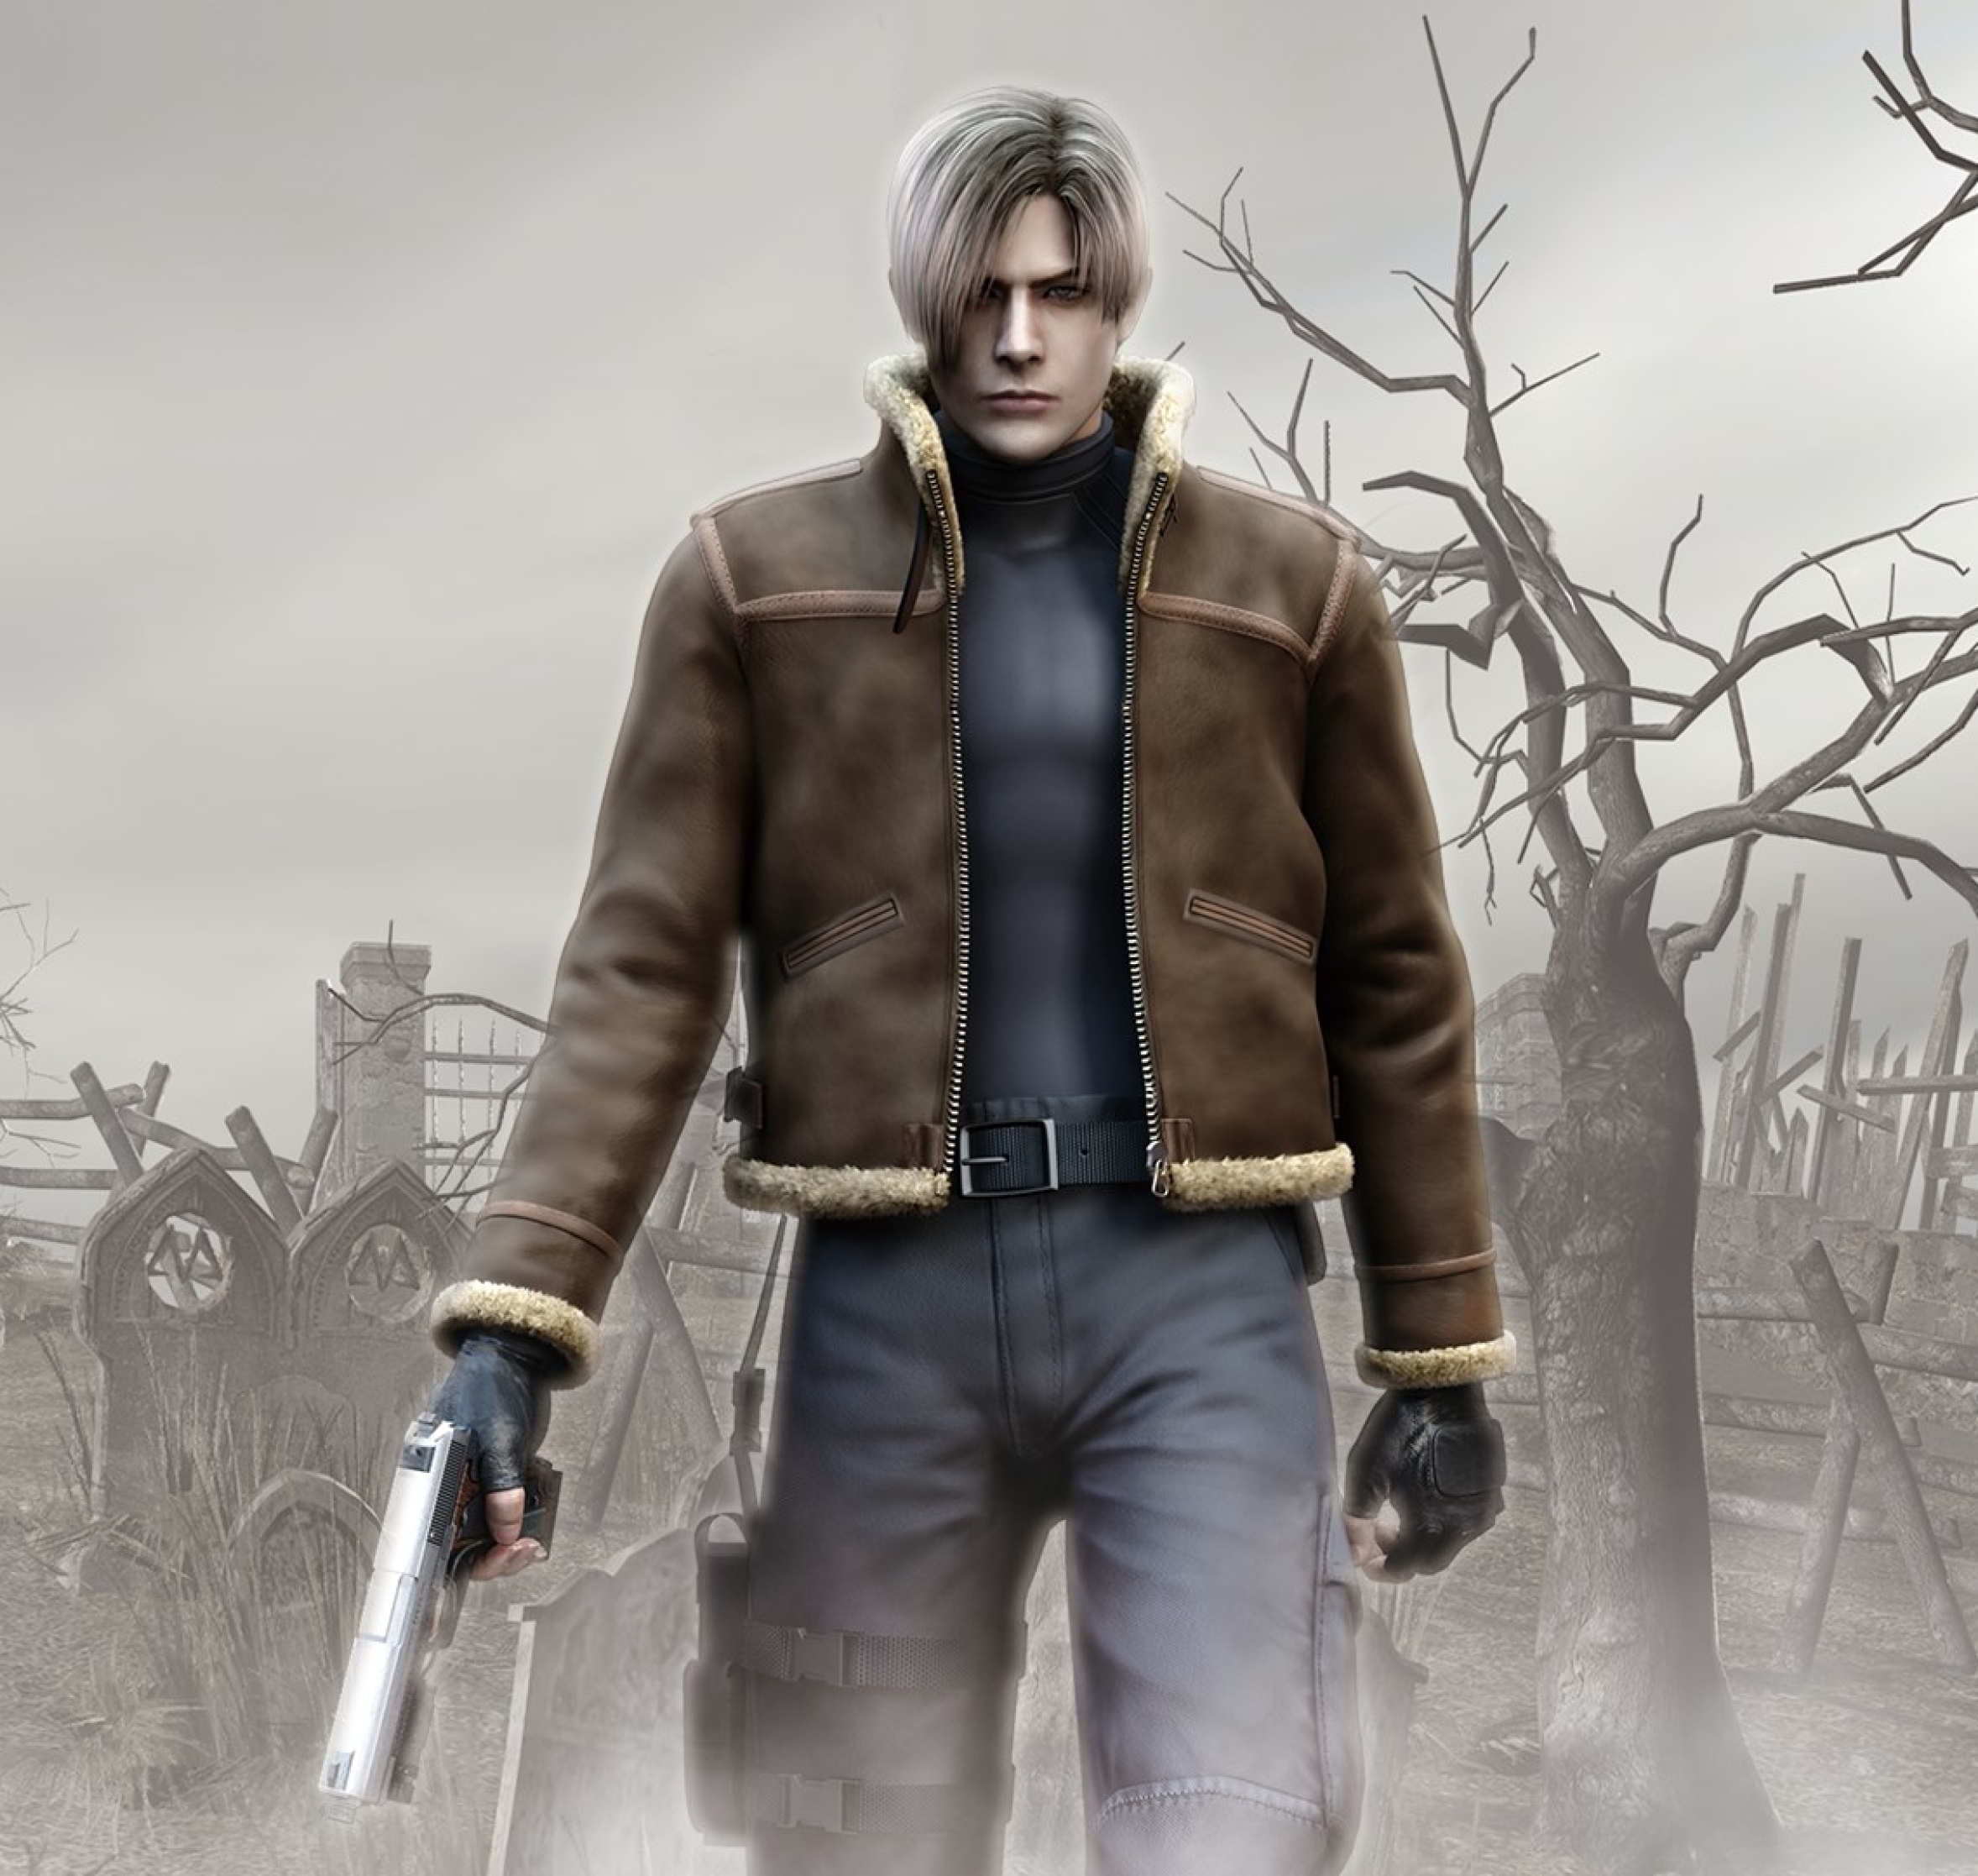 2356x2234 Resident Evil 4 Leon S Kennedy 2356x2234 Resolution Wallpaper Hd Games 4k Wallpapers 5740